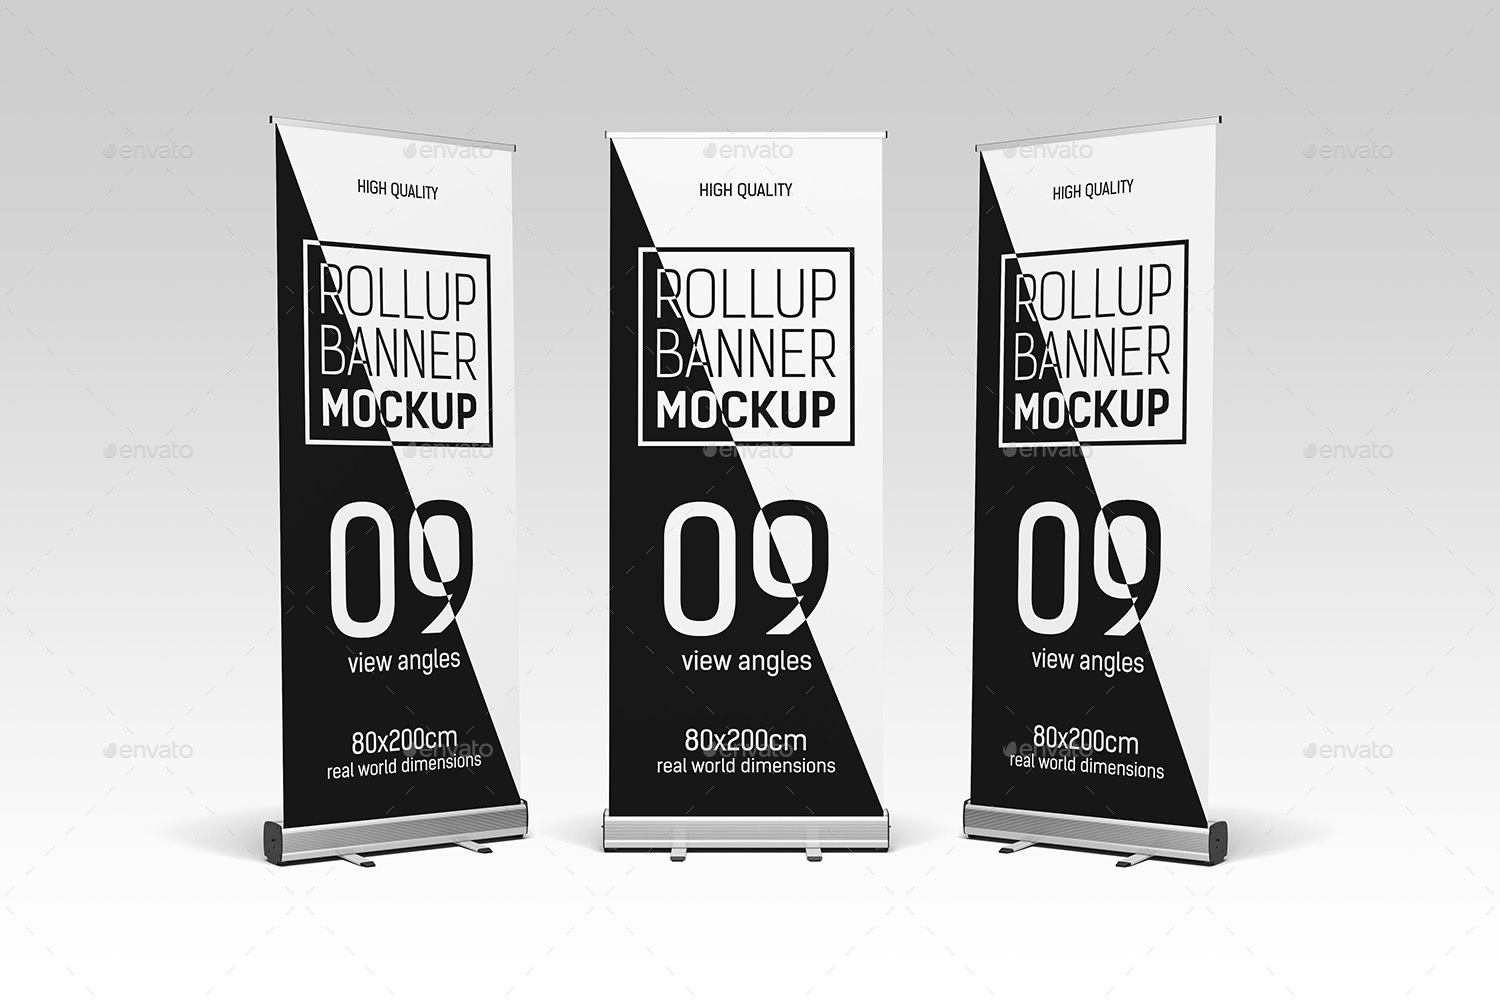 Download Roll-up Banner Mockup by 102design | GraphicRiver